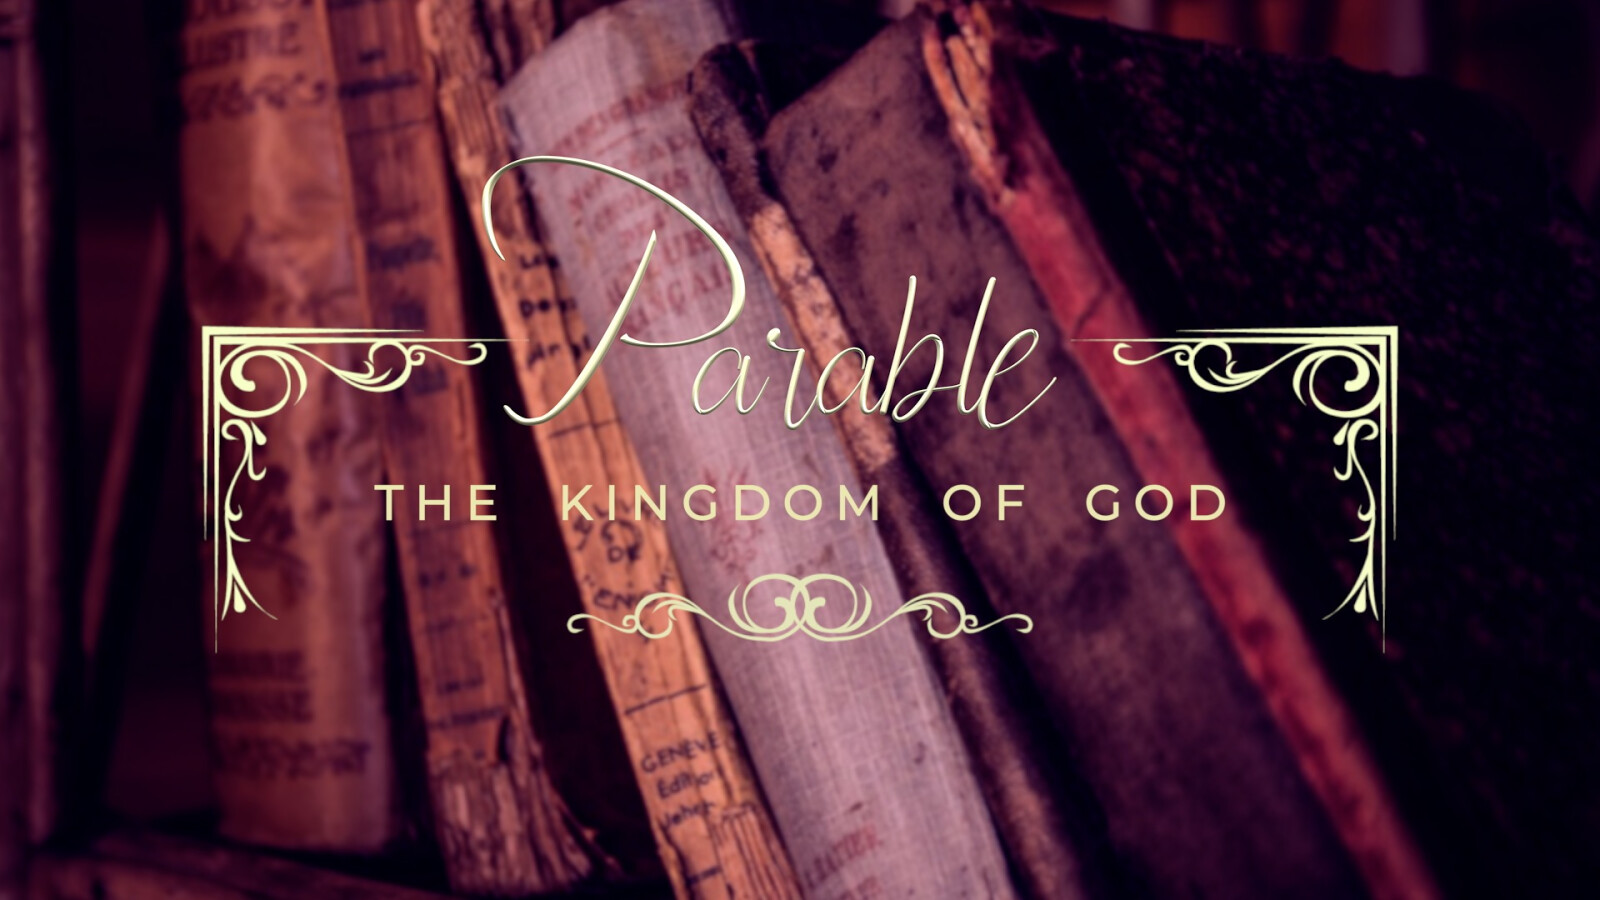 Parable: The Kingdom of God